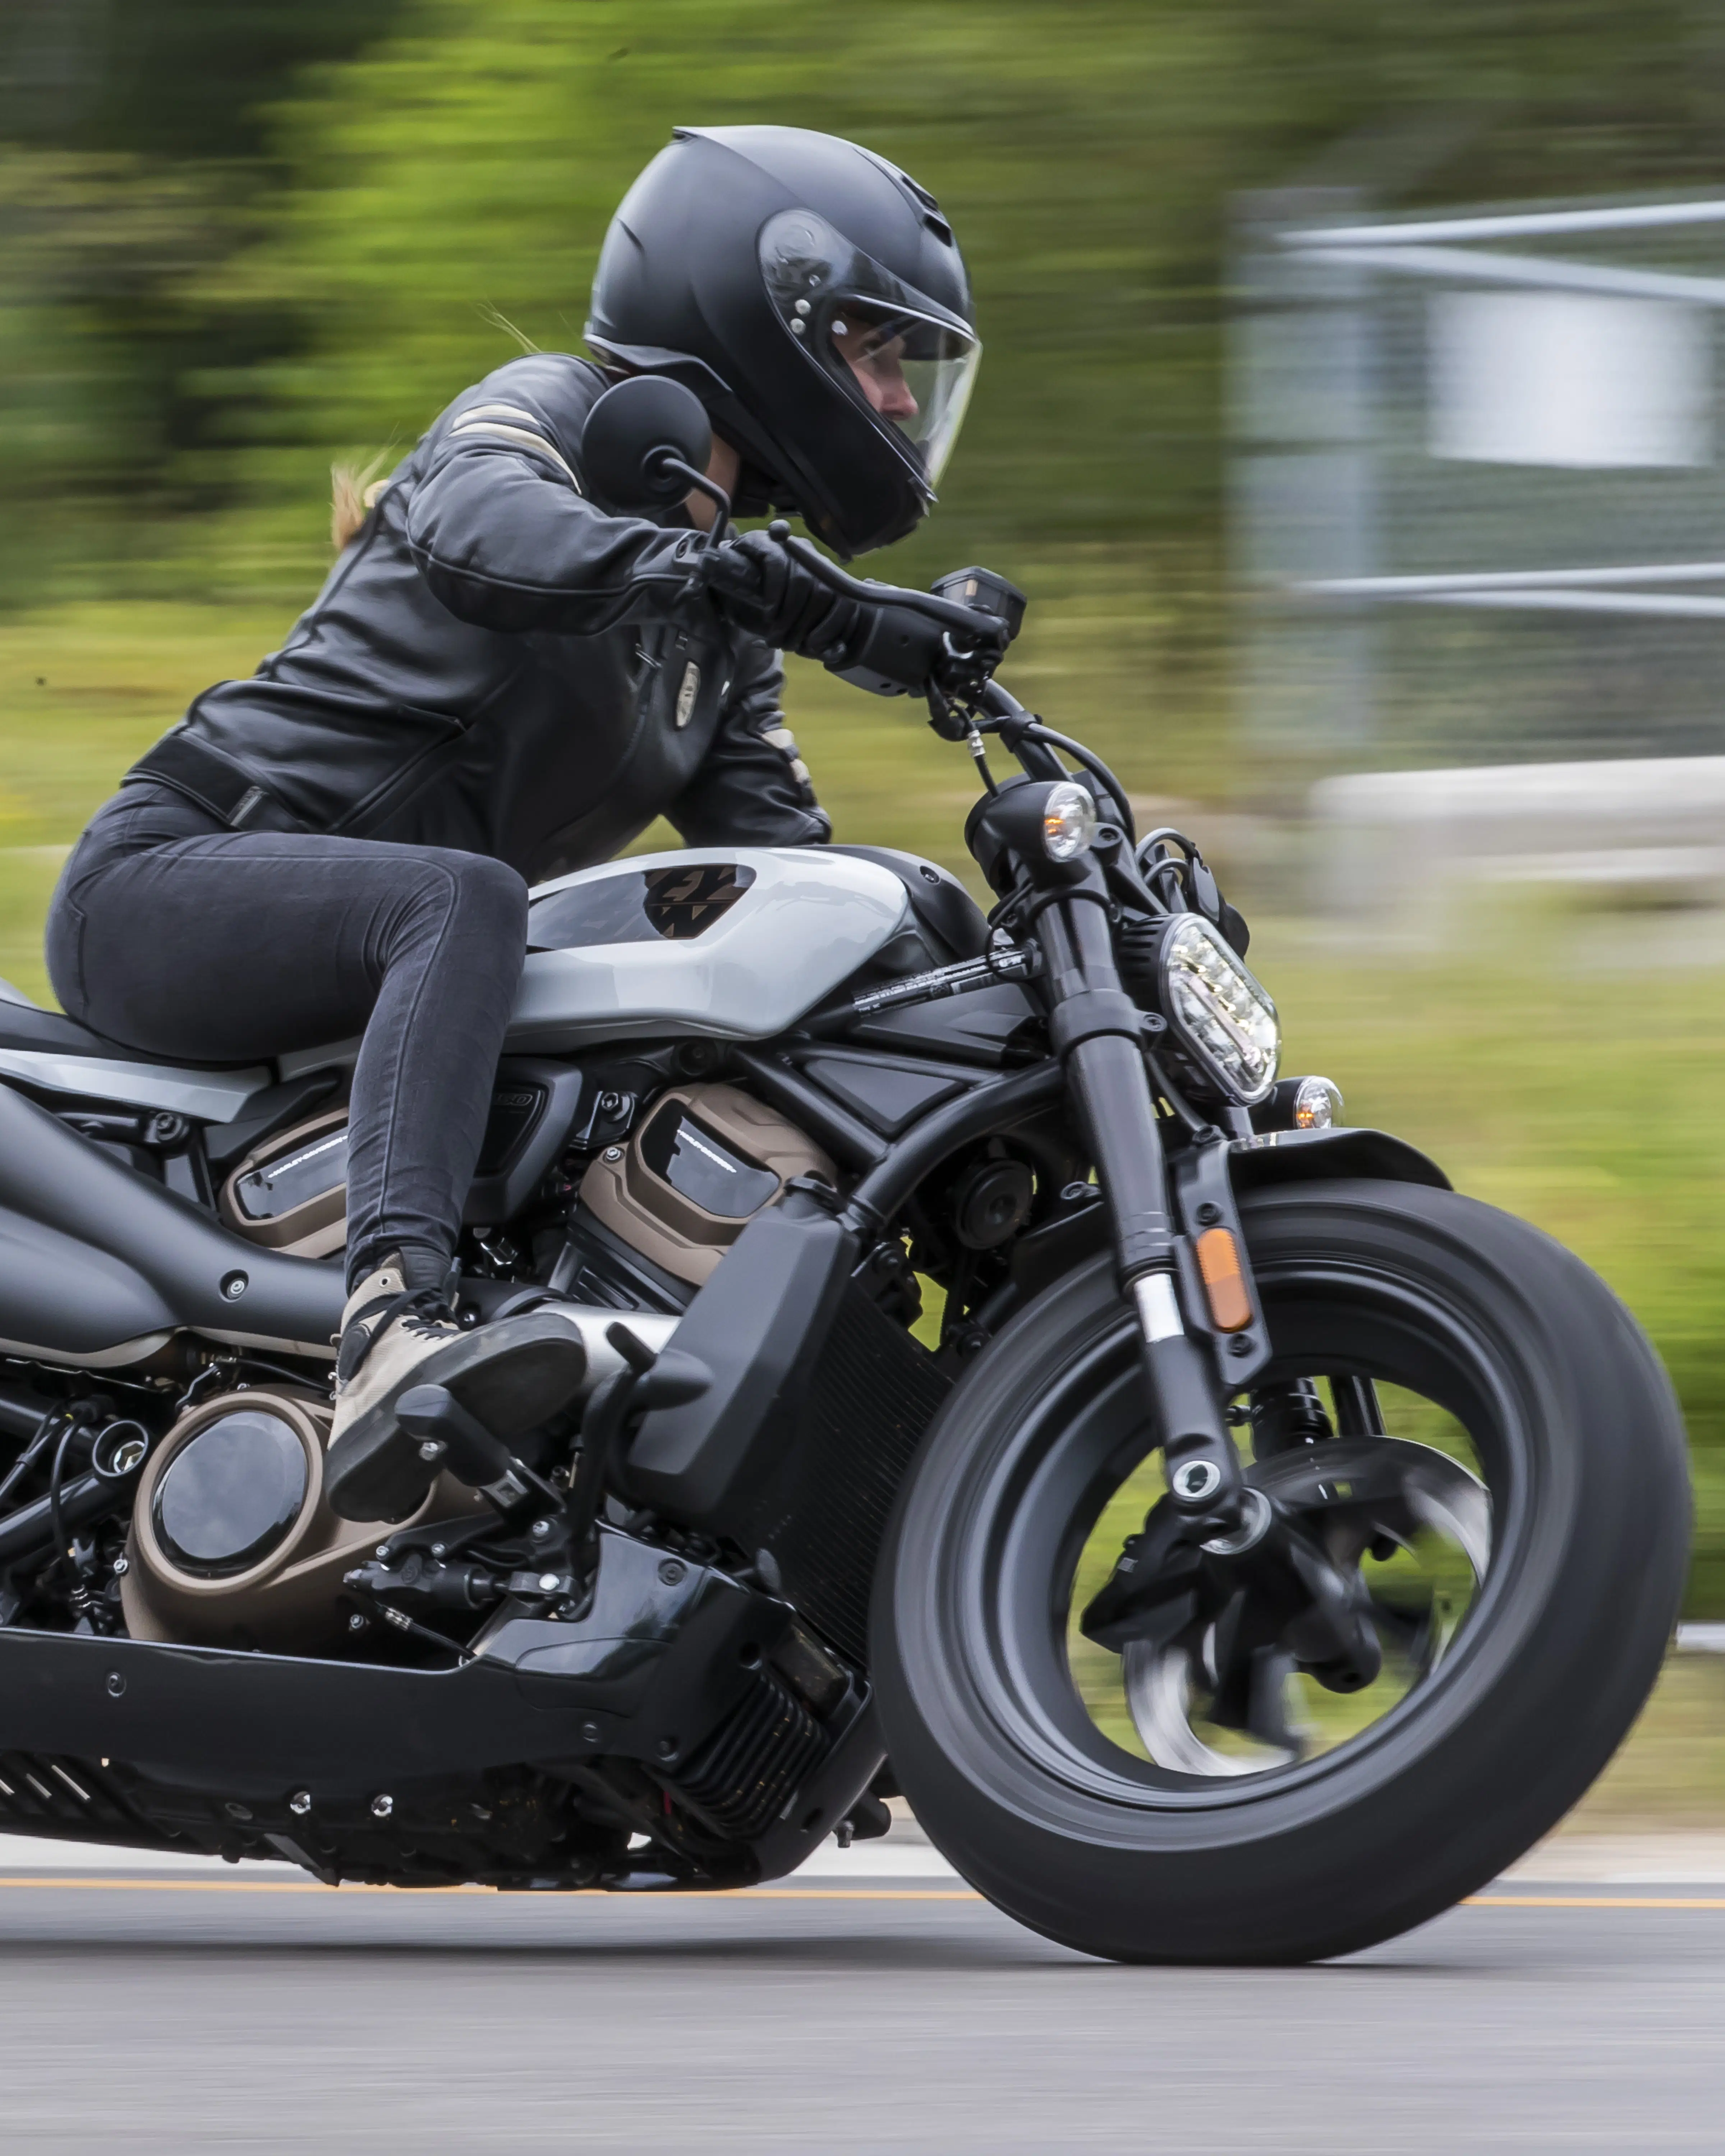 The power is there with the 2021 Sportster S!